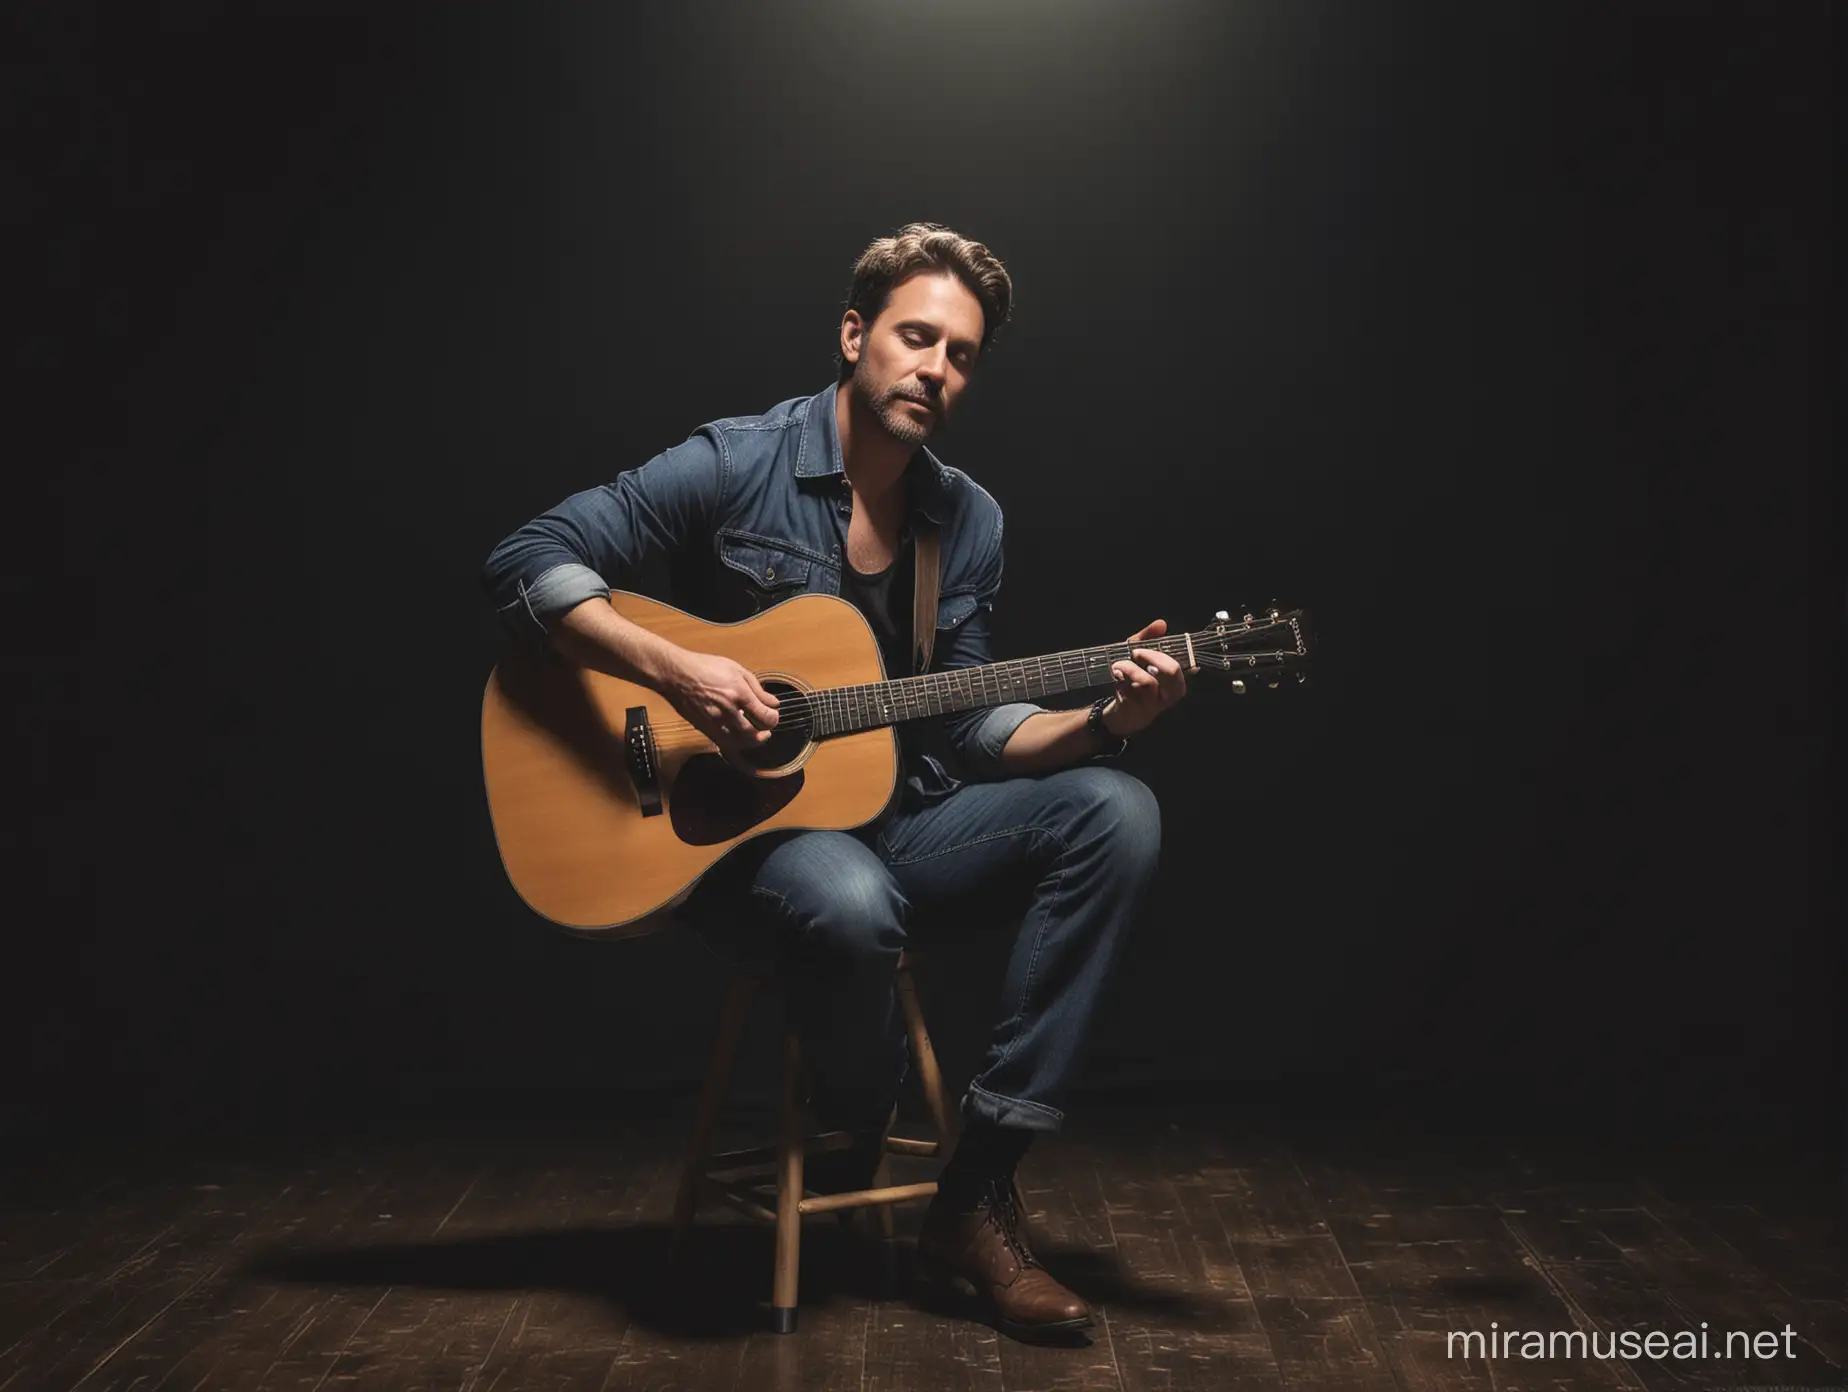 photograph of a 40 year old male singer songwriter sitting on a stool on a dark stage with an acoustic guitar wearing baggy pants